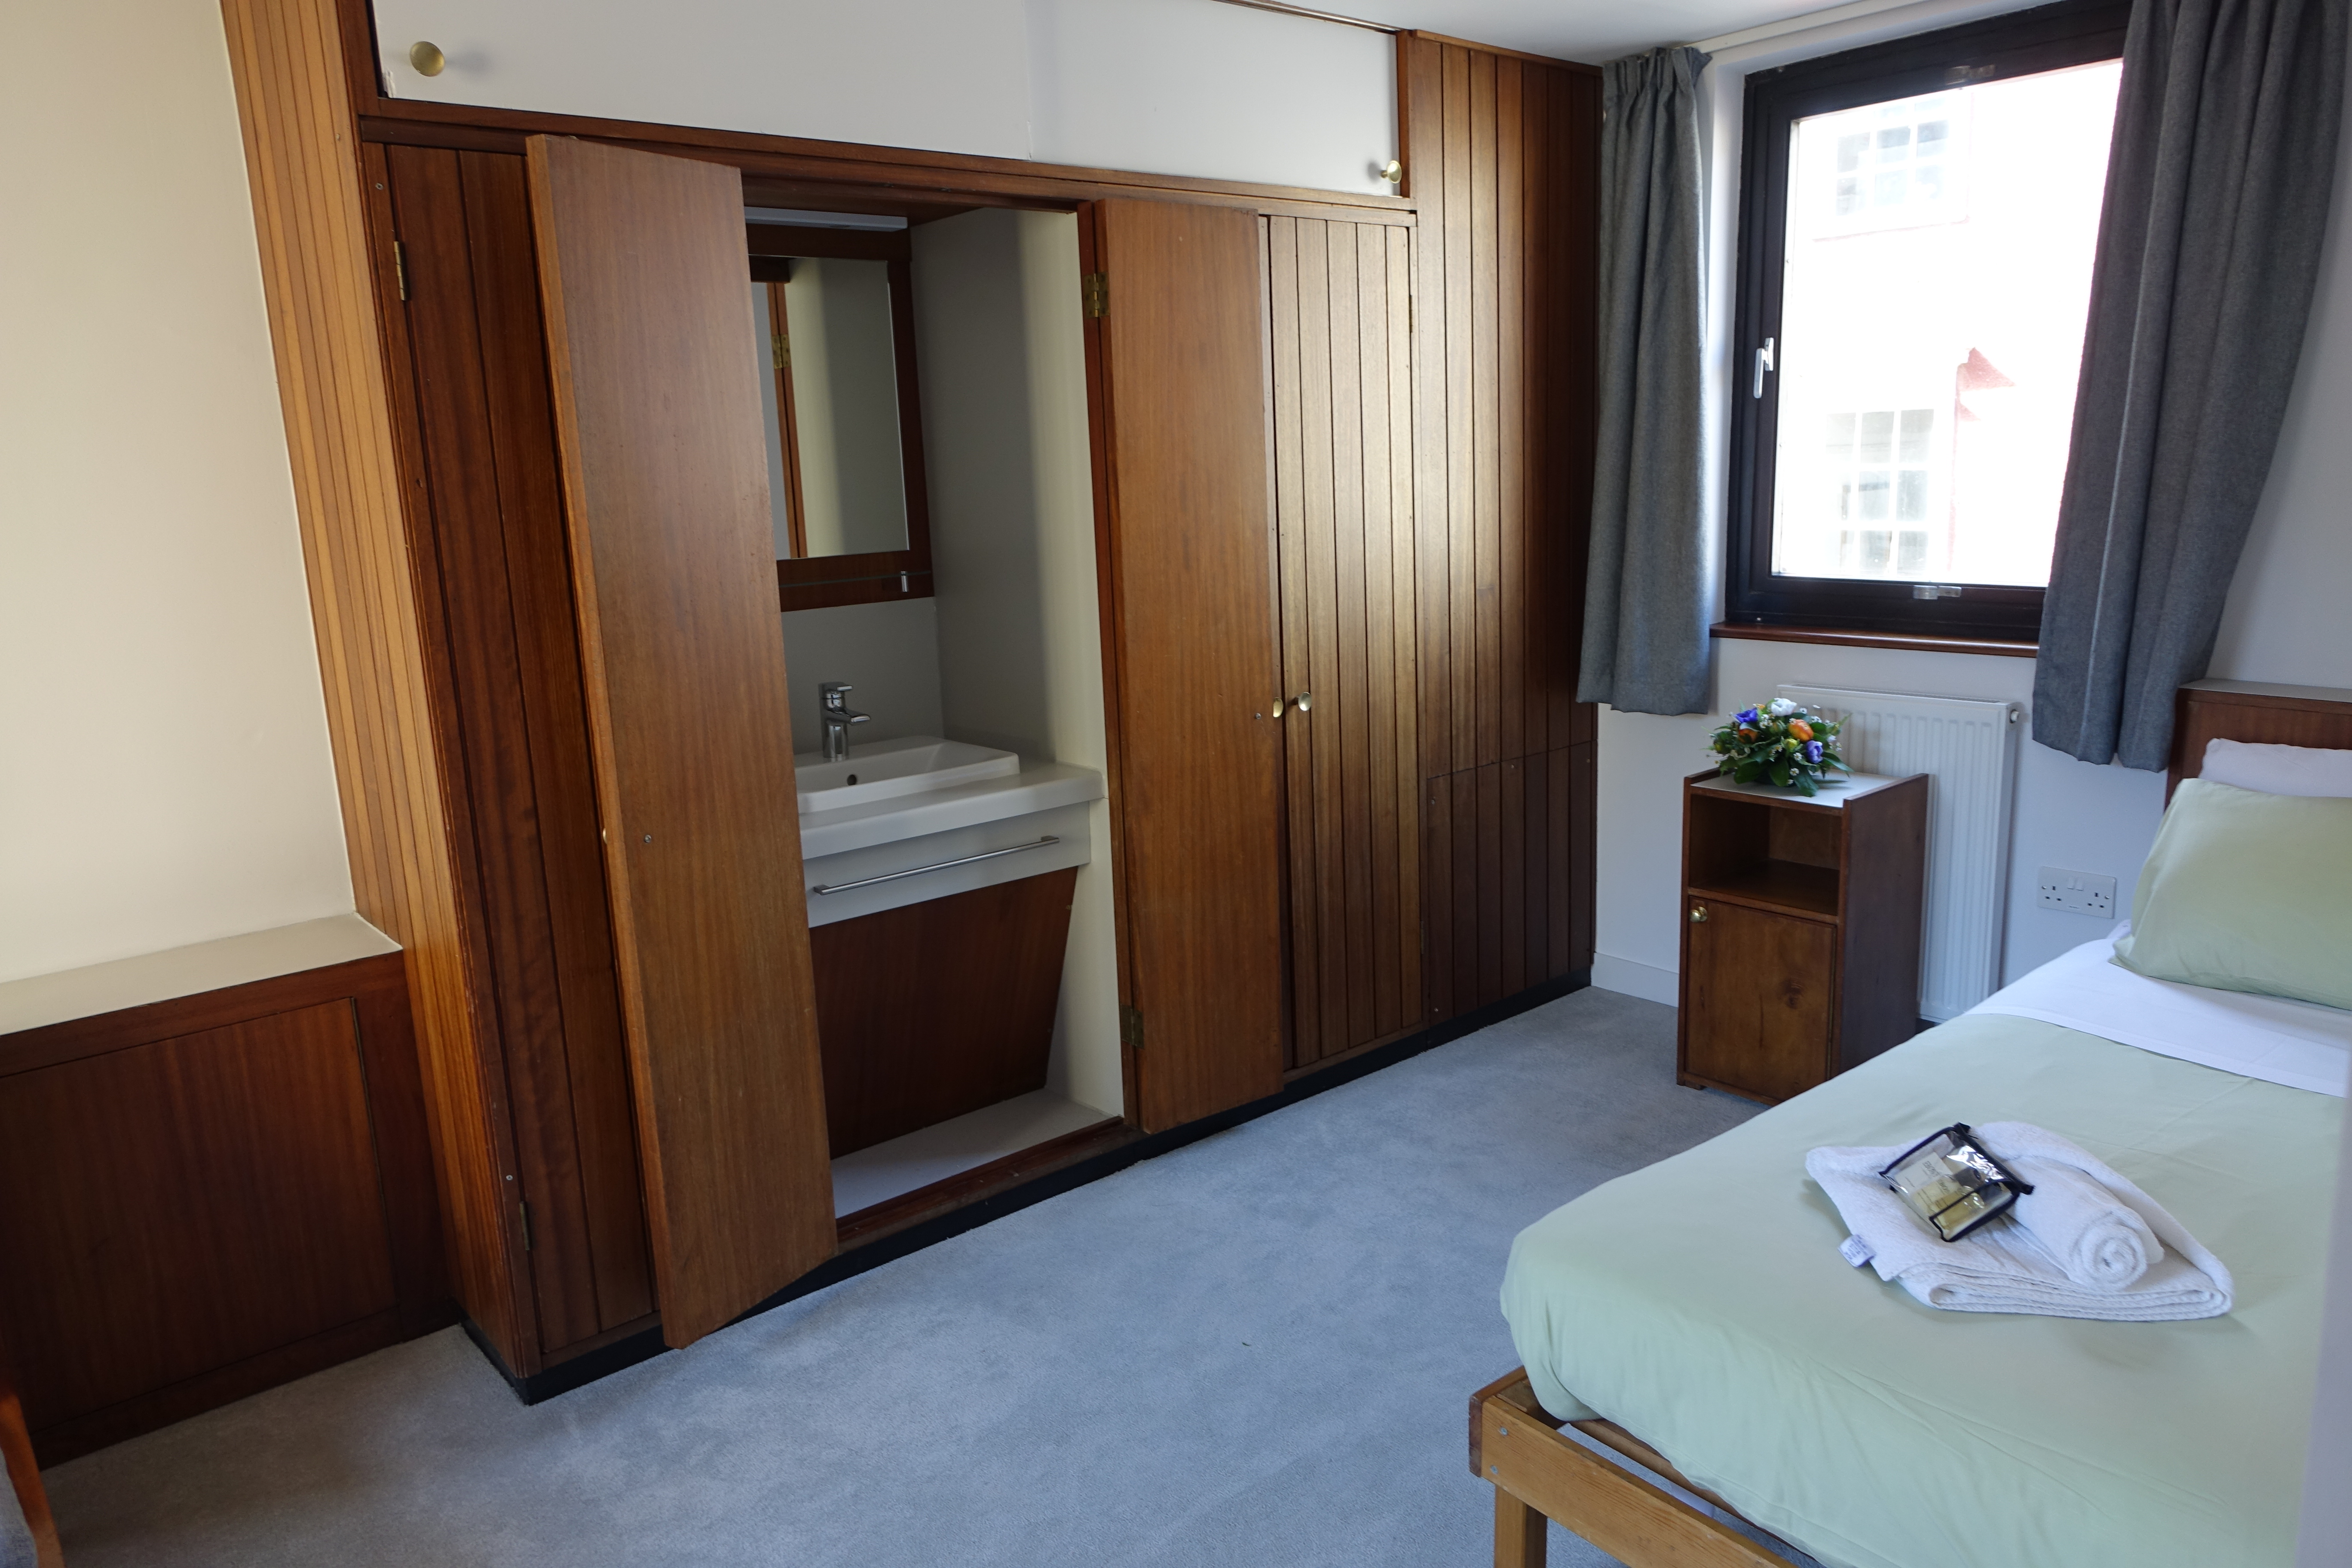 A standard single bedroom with wash hand basin